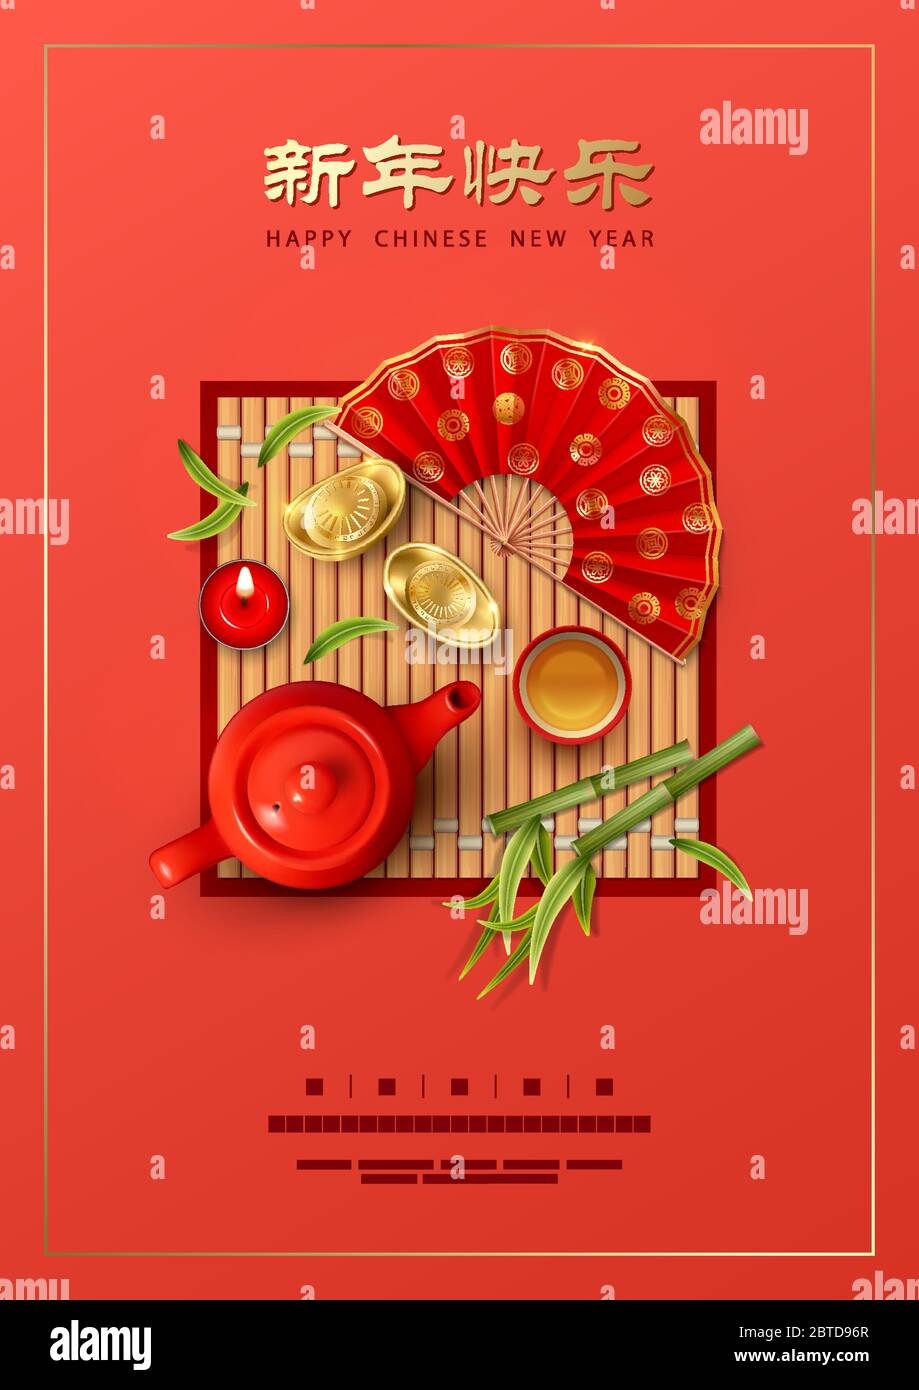 chinese-new-year-poster-stock-vector-image-art-alamy